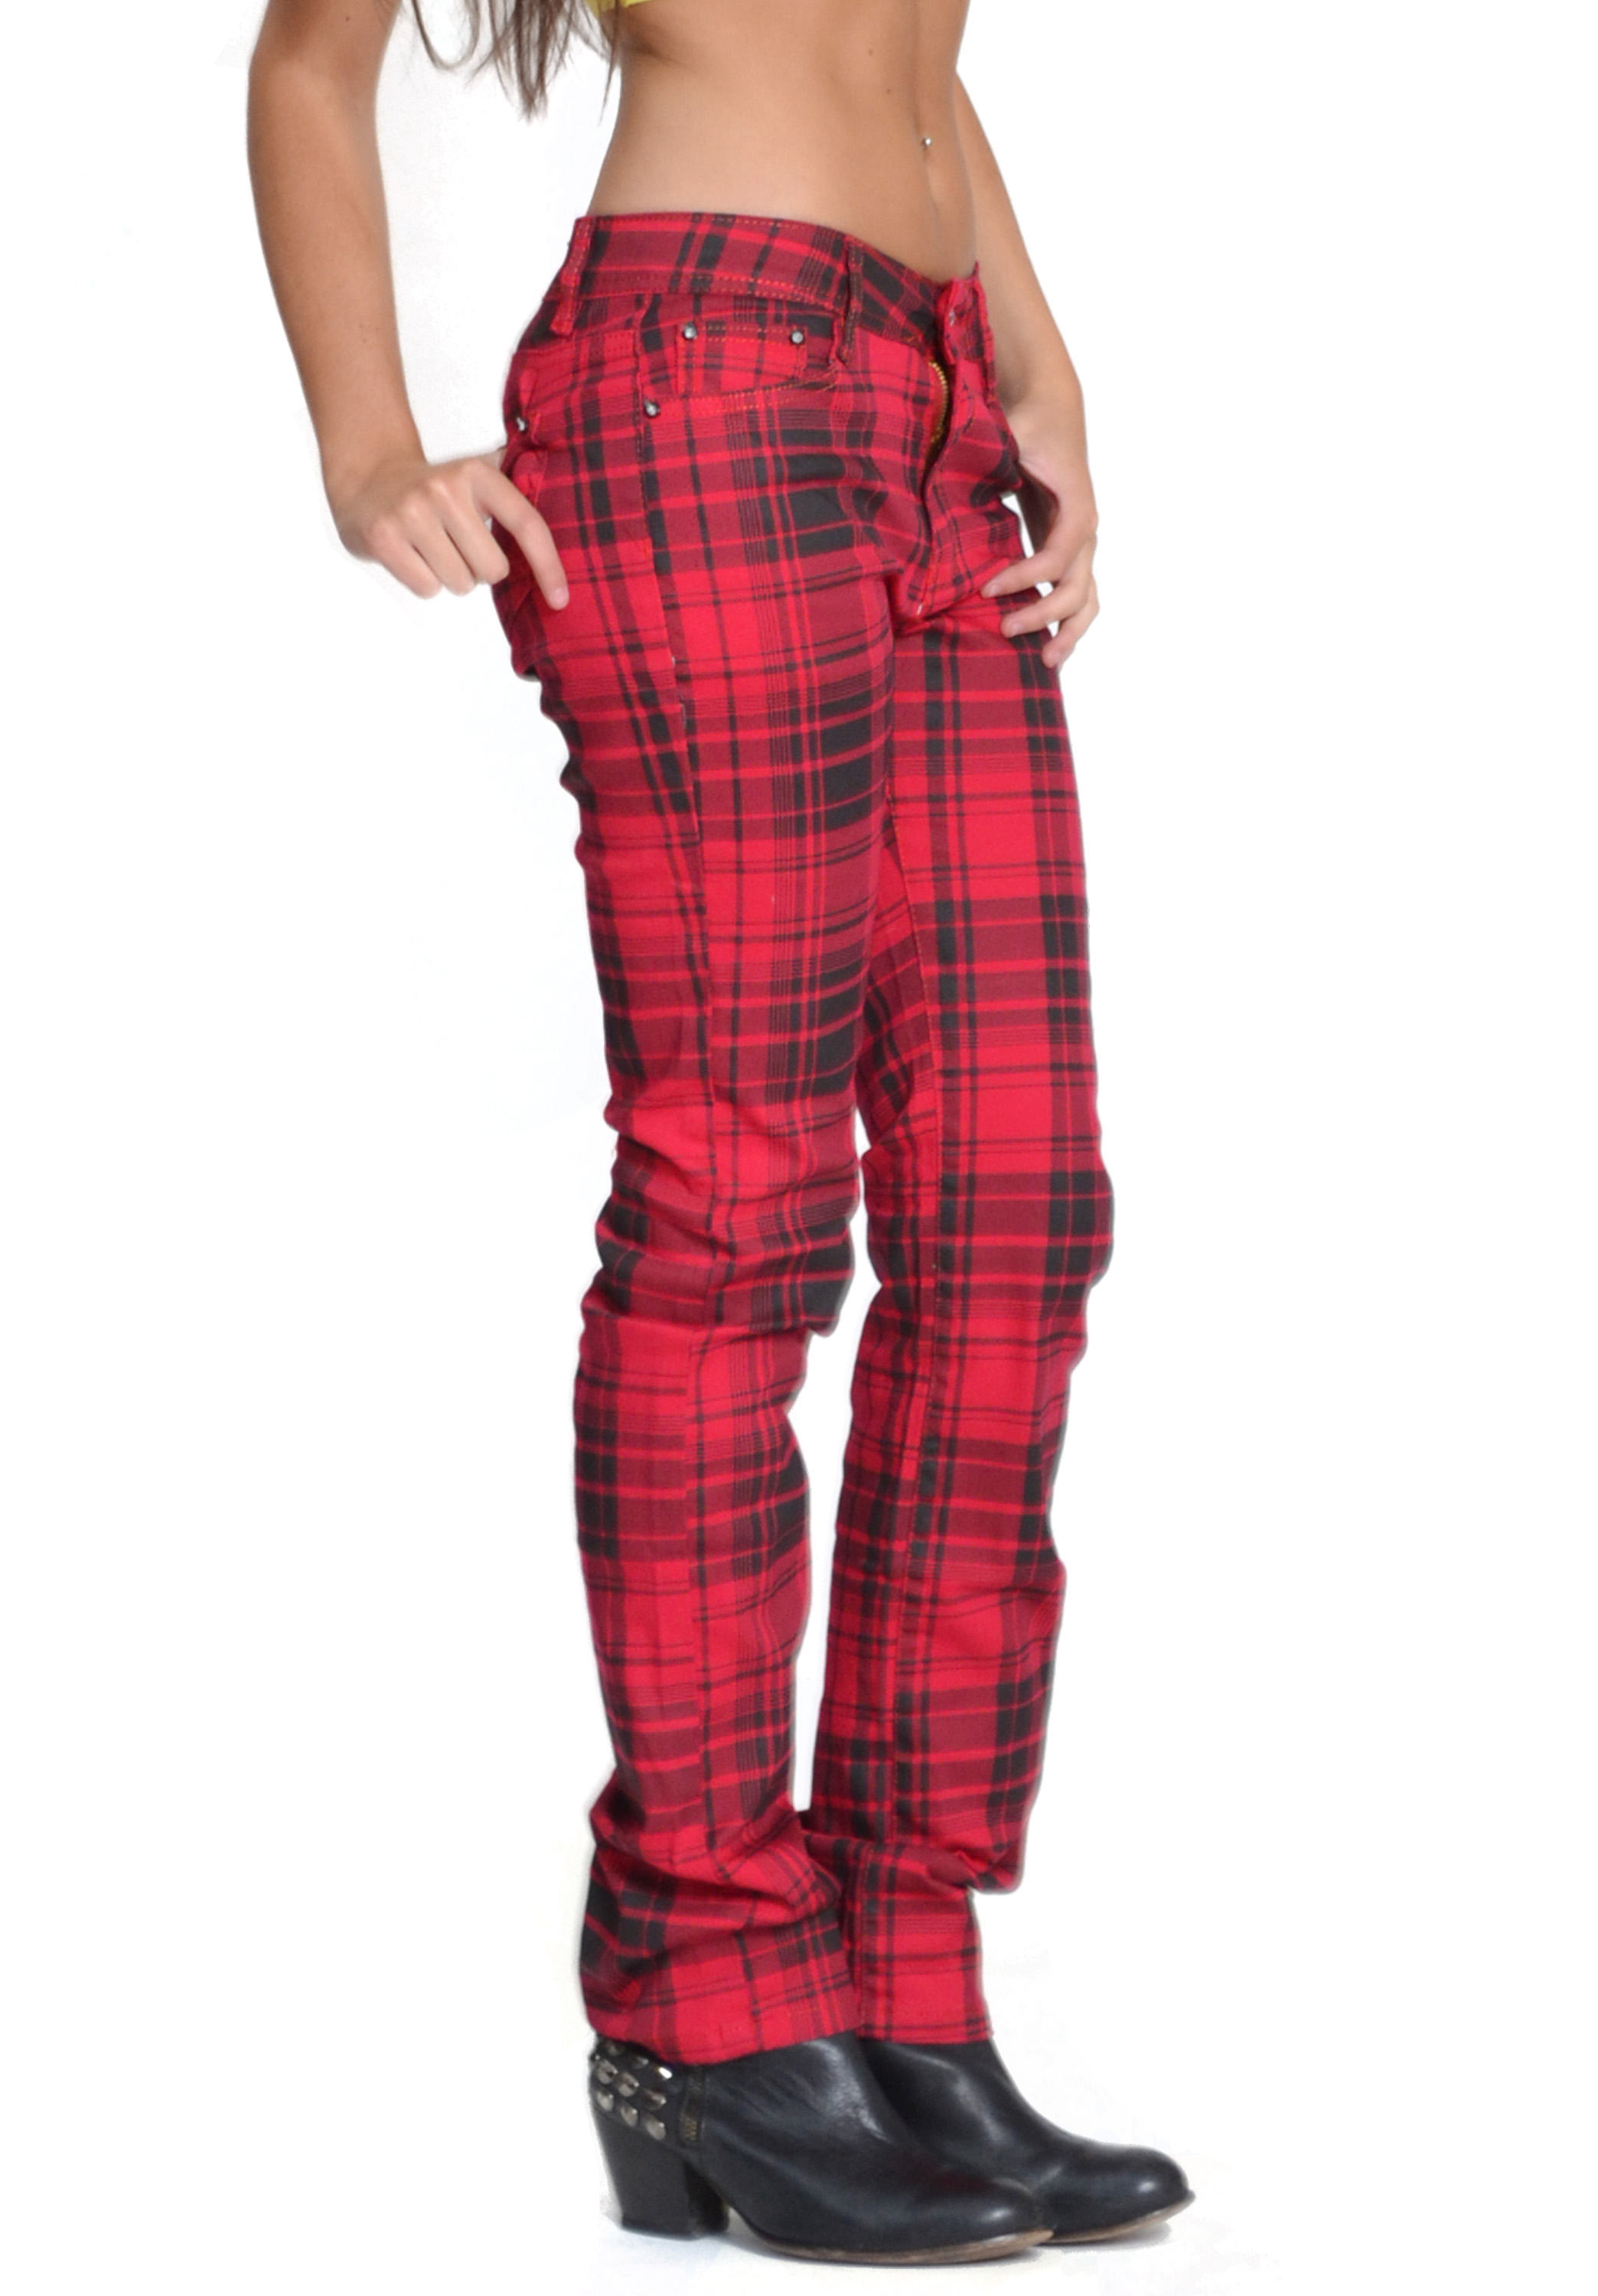 Red Tartan Checked Plaid Skinny Slim Fitted Stretch Pants Punk Trousers ...